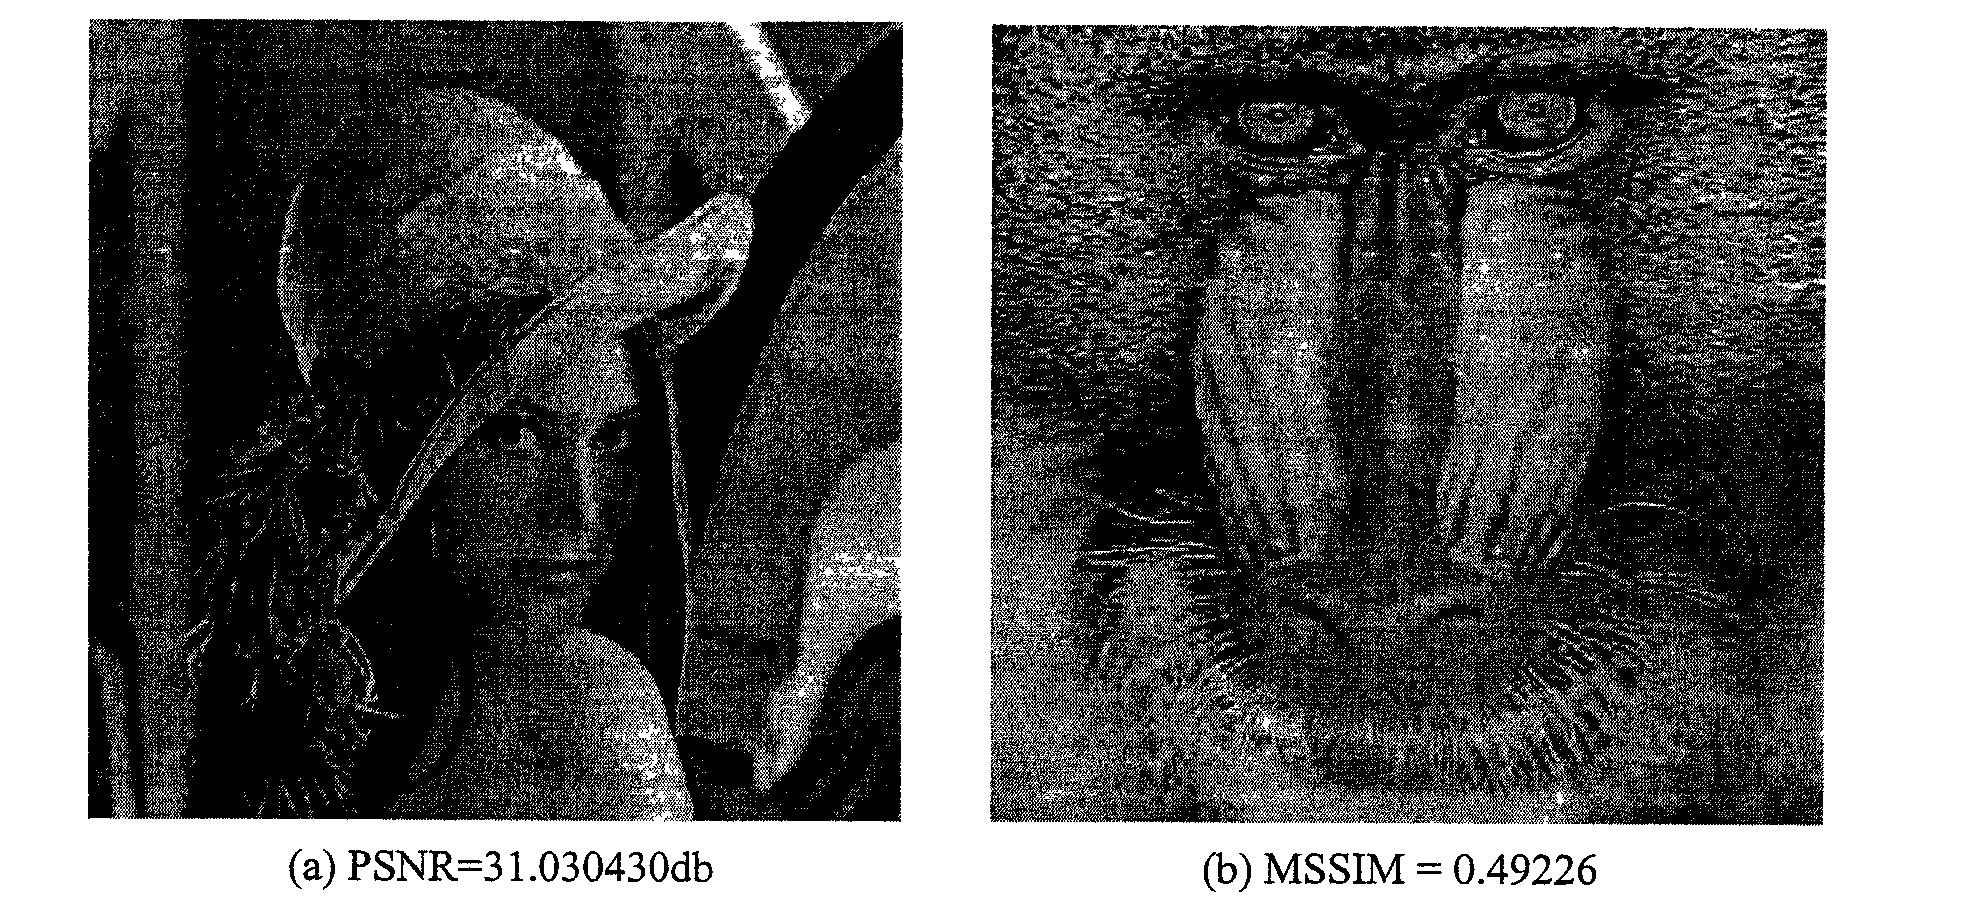 Low code rate image compression method based on down sampling and interpolation